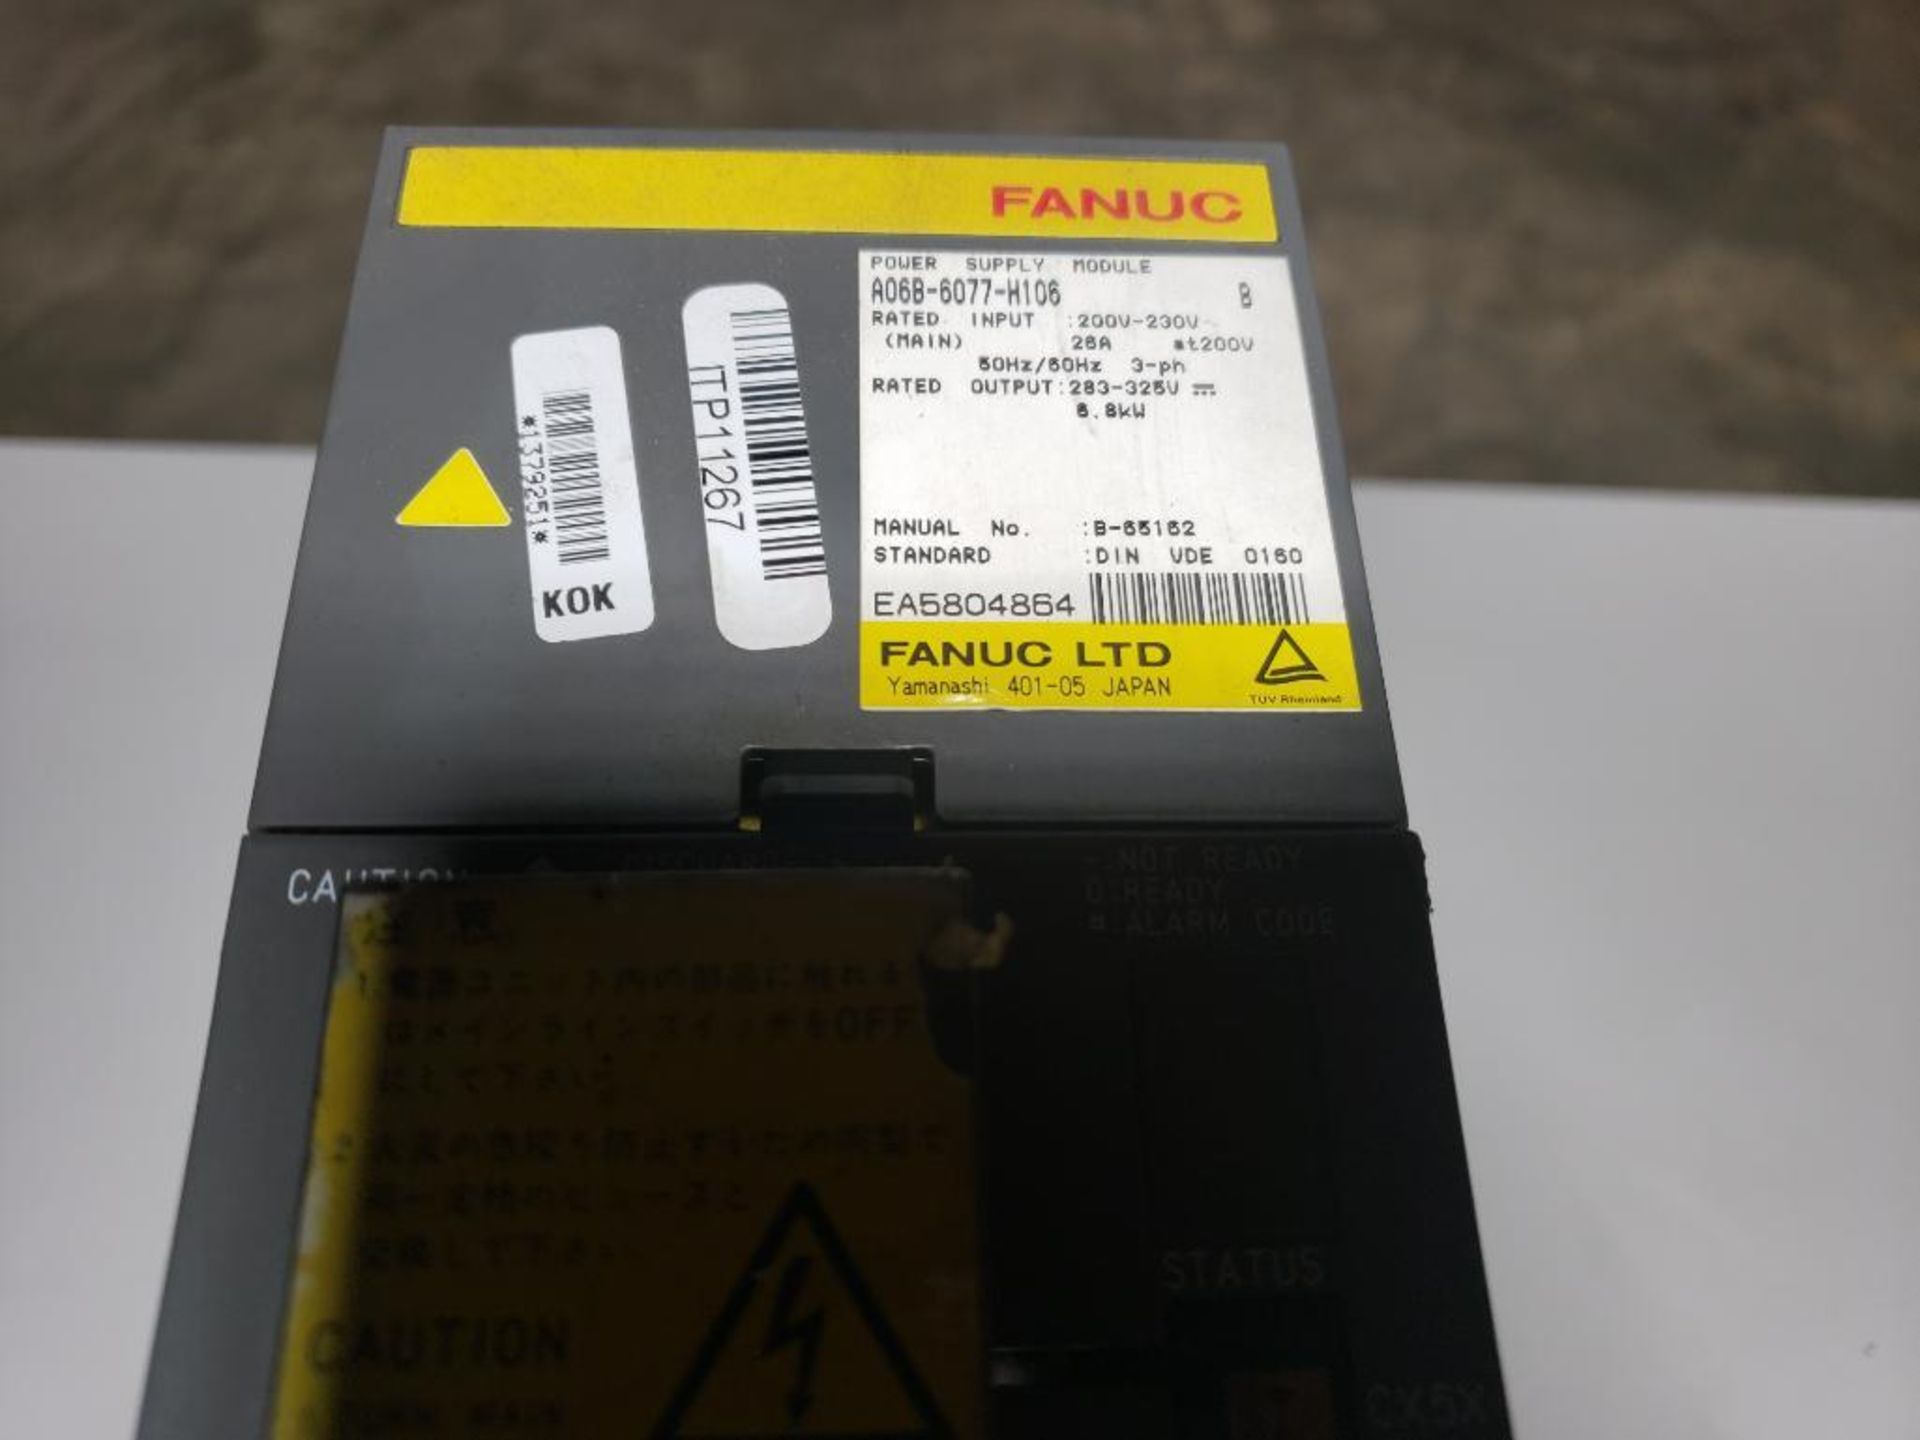 Fanuc power supply module. Part number A06B-6077-H106. - Image 2 of 4